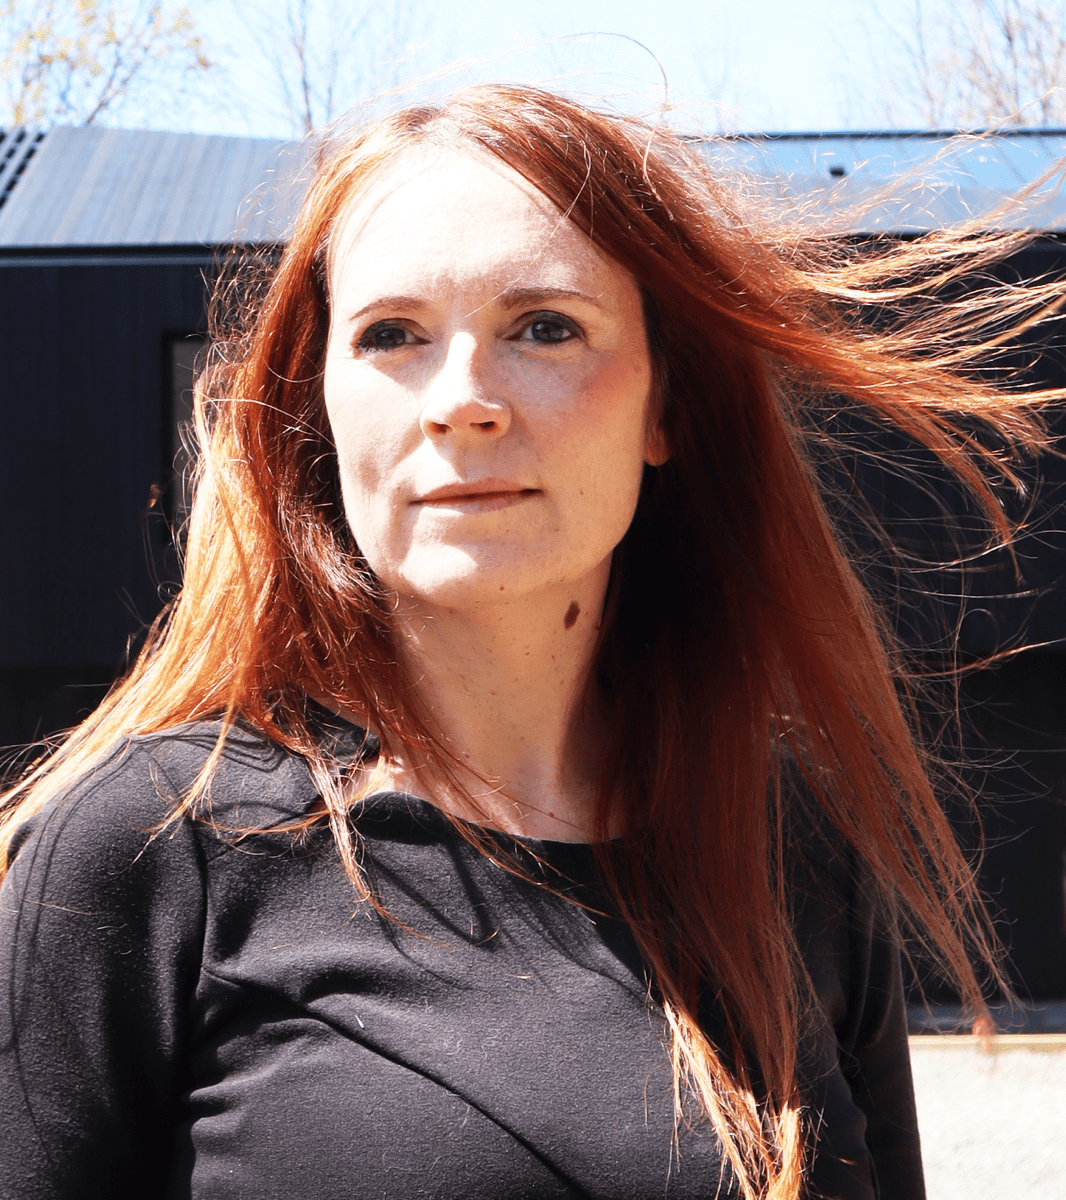 A person with long red hair a black shirt standing in front of a building.